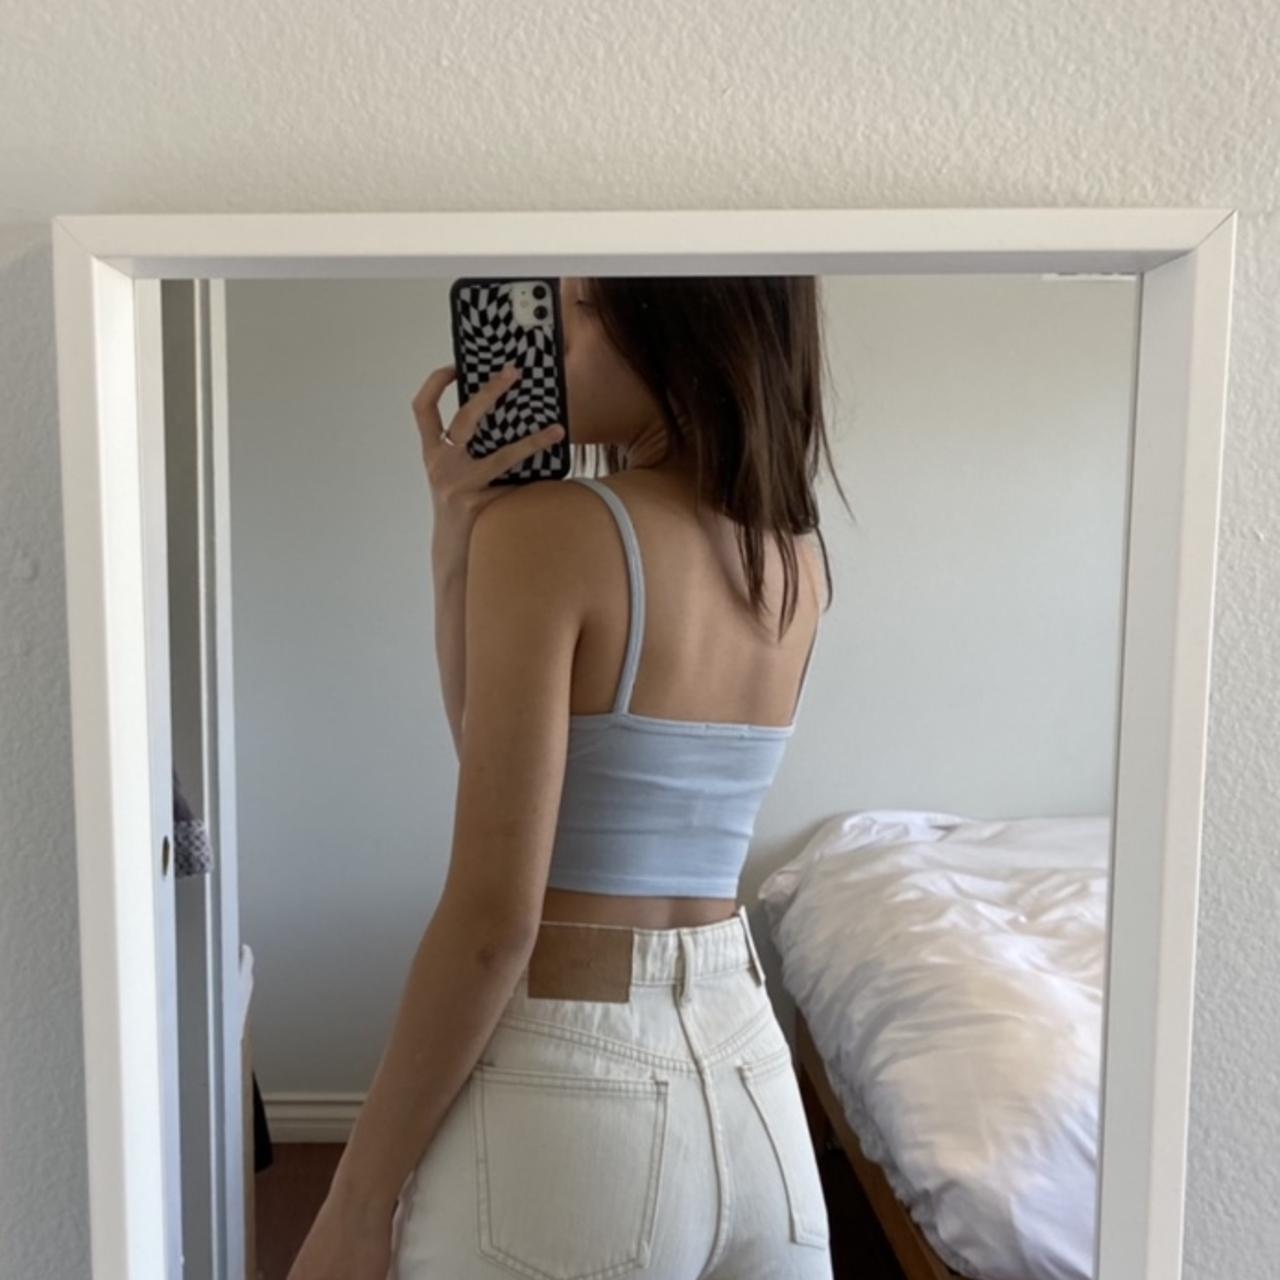 Styling My Favorite Brandy Melville Tank 🤍, Gallery posted by aya.bright